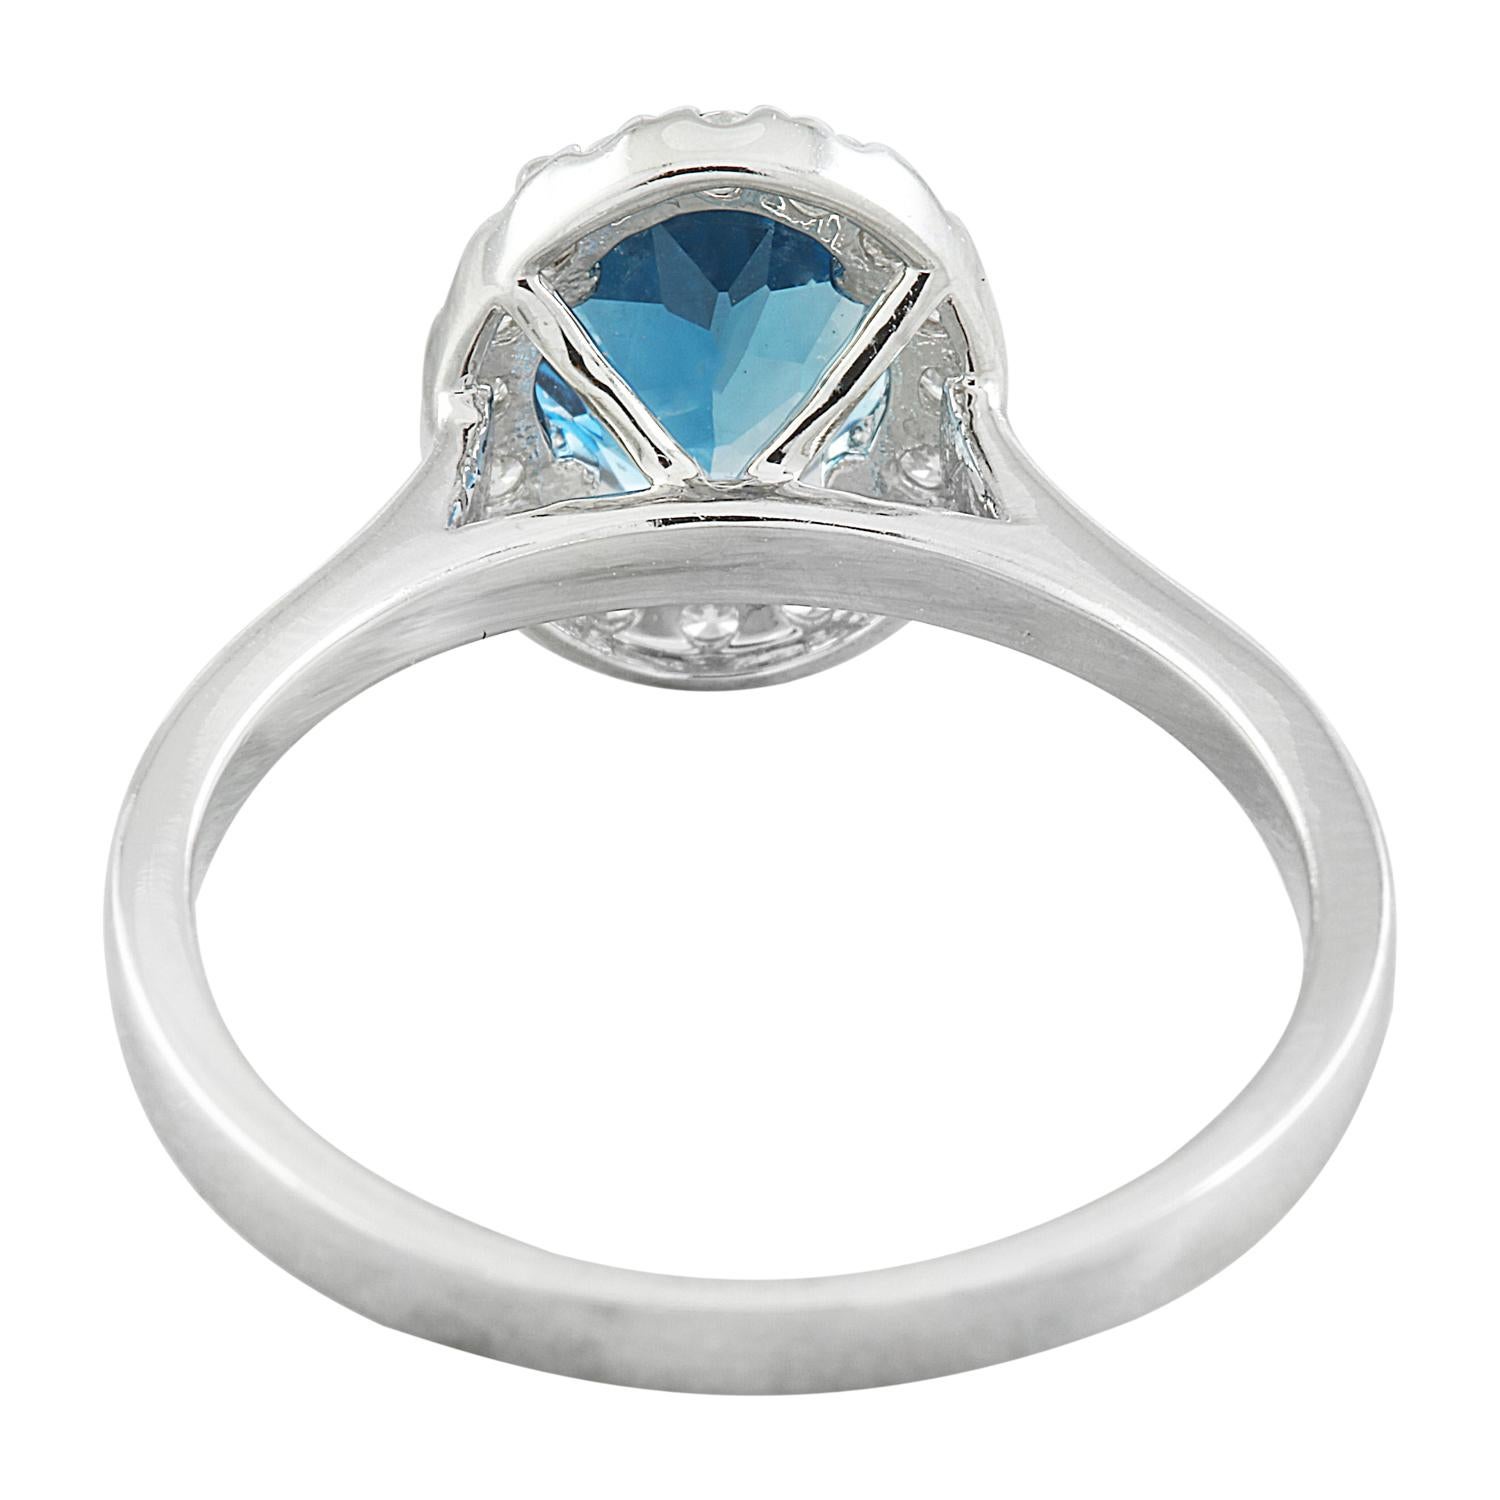 Oval Cut Exquisite Natural Topaz Diamond Ring in 14K Solid White Gold For Sale